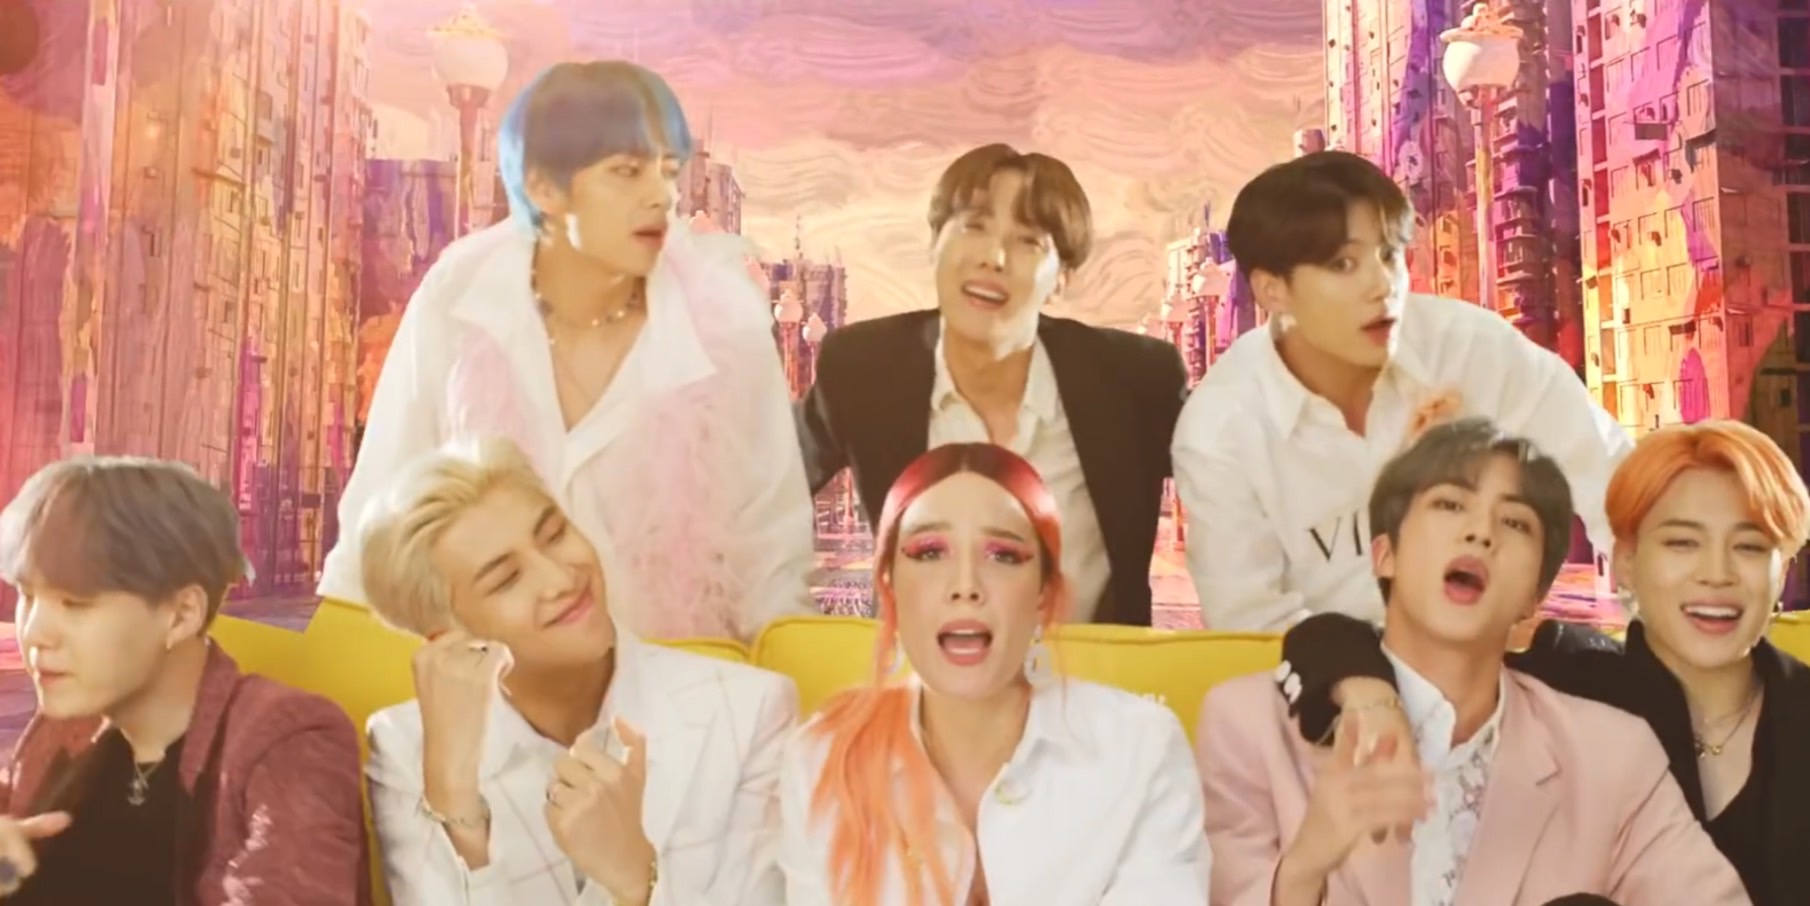 Collaborating with International Musicians, These BTS Songs are Easy Listening!